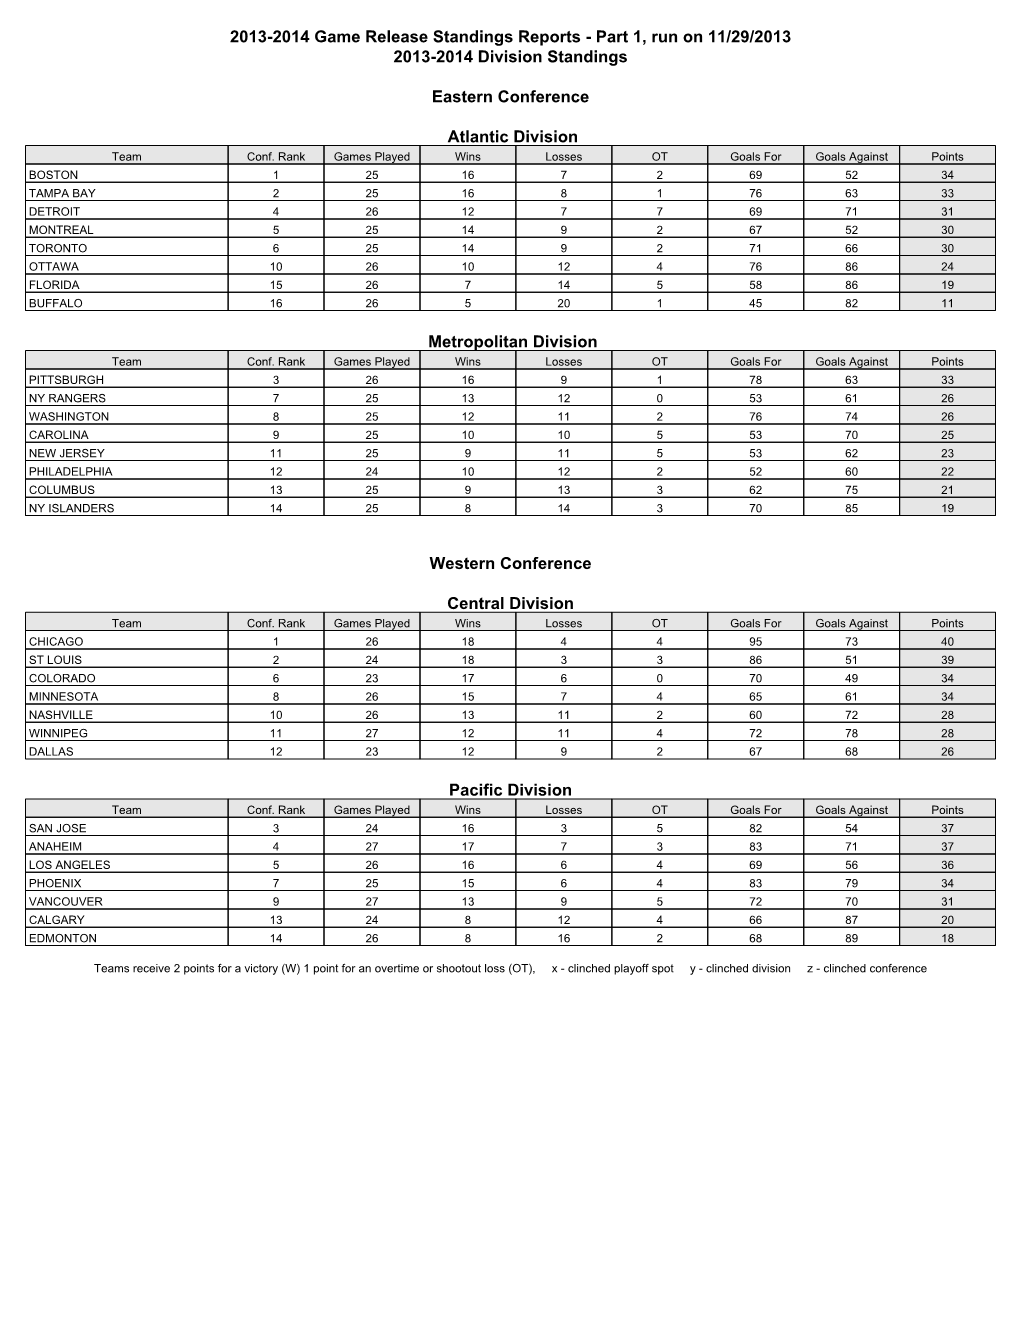 2013-2014 Game Release Standings Reports - Part 1, Run on 11/29/2013 2013-2014 Division Standings